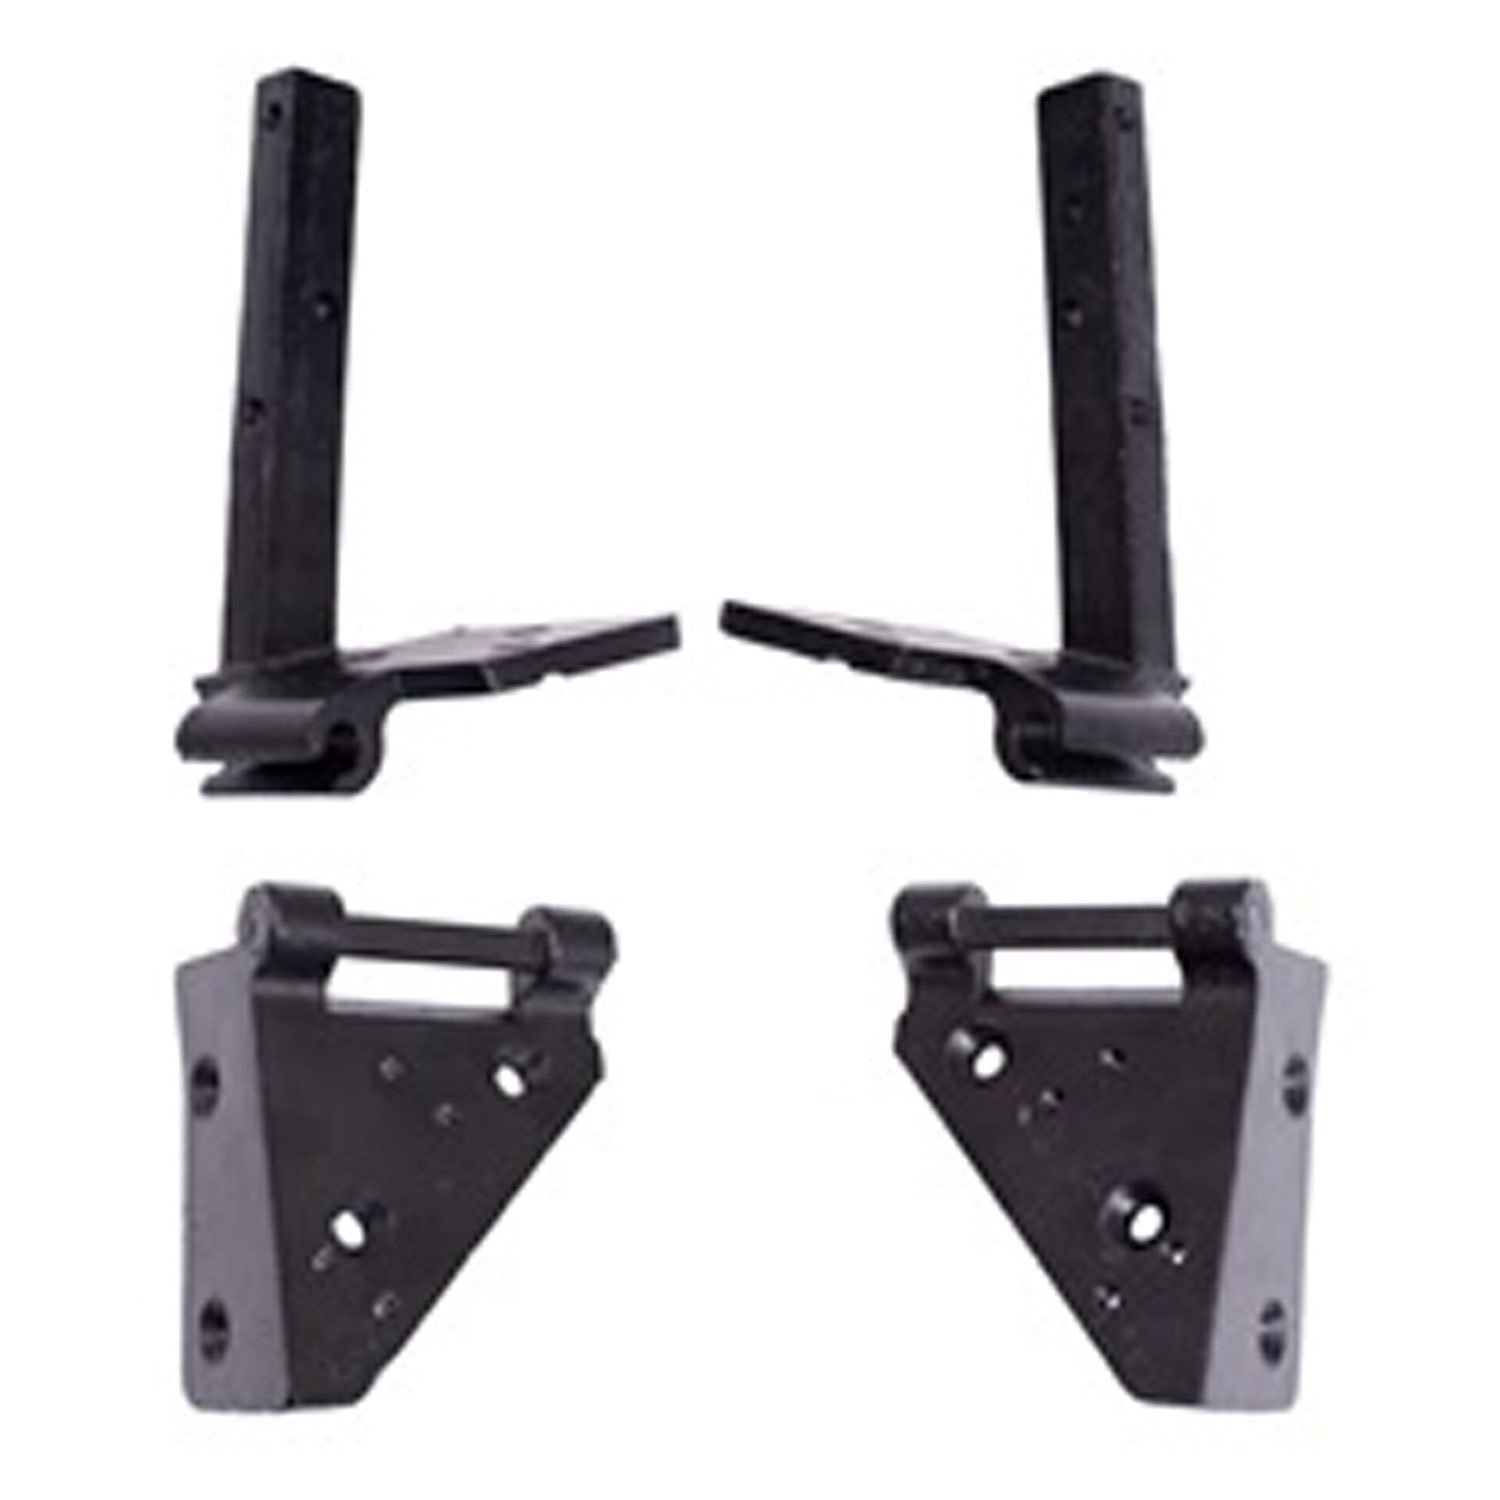 4 piece replacement windshield hinge set from Omix-ADA, Fits 52-75 Willys and Jeep models